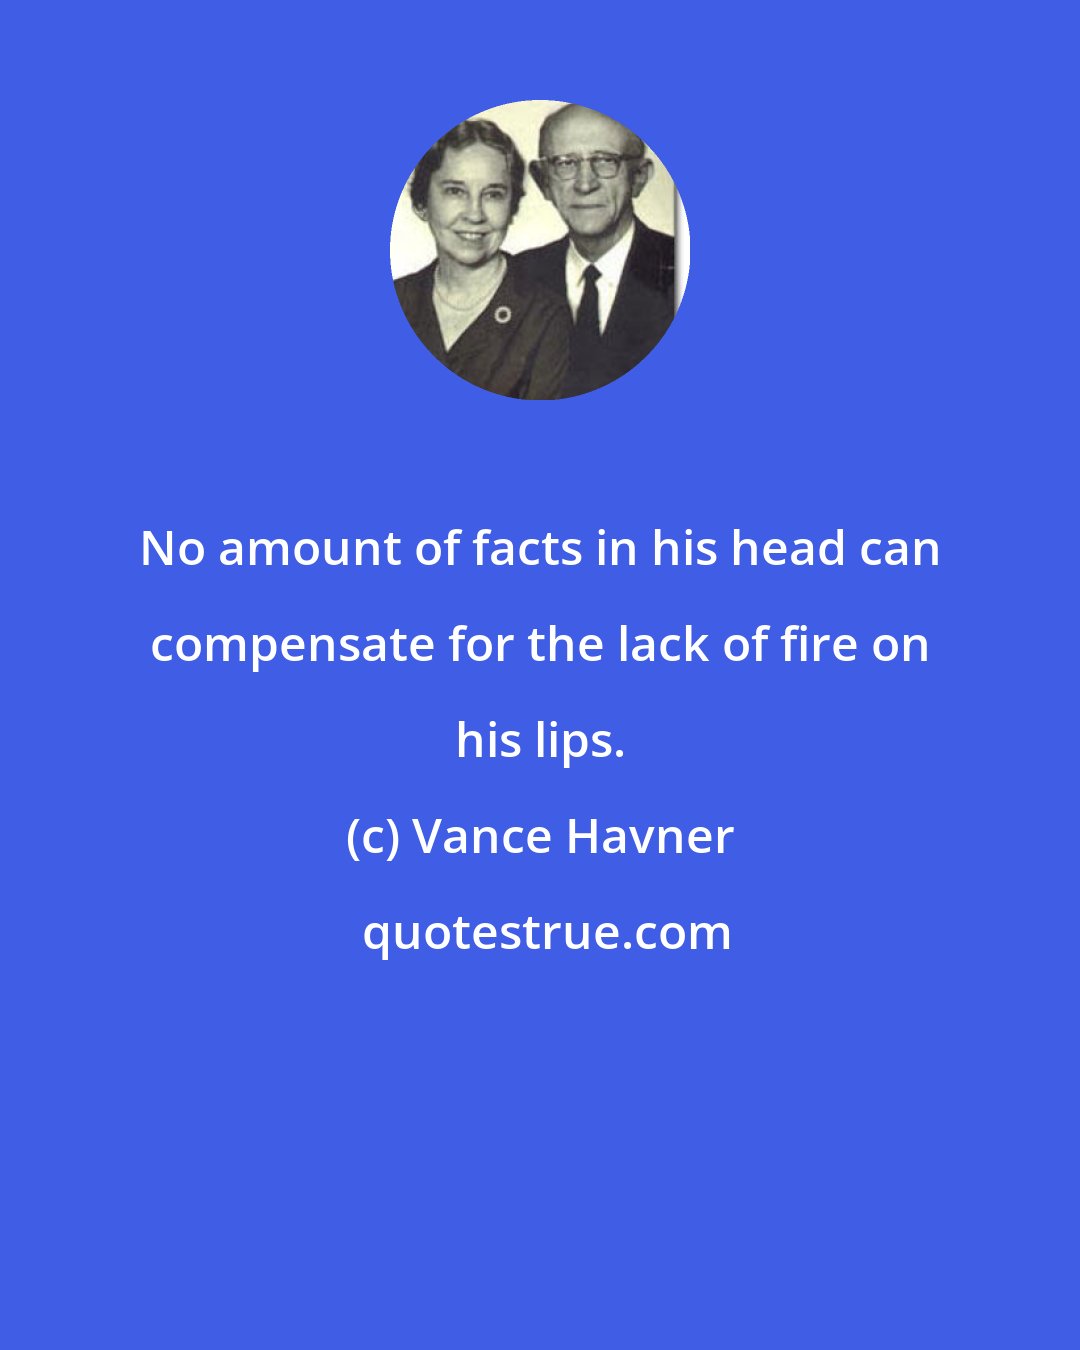 Vance Havner: No amount of facts in his head can compensate for the lack of fire on his lips.